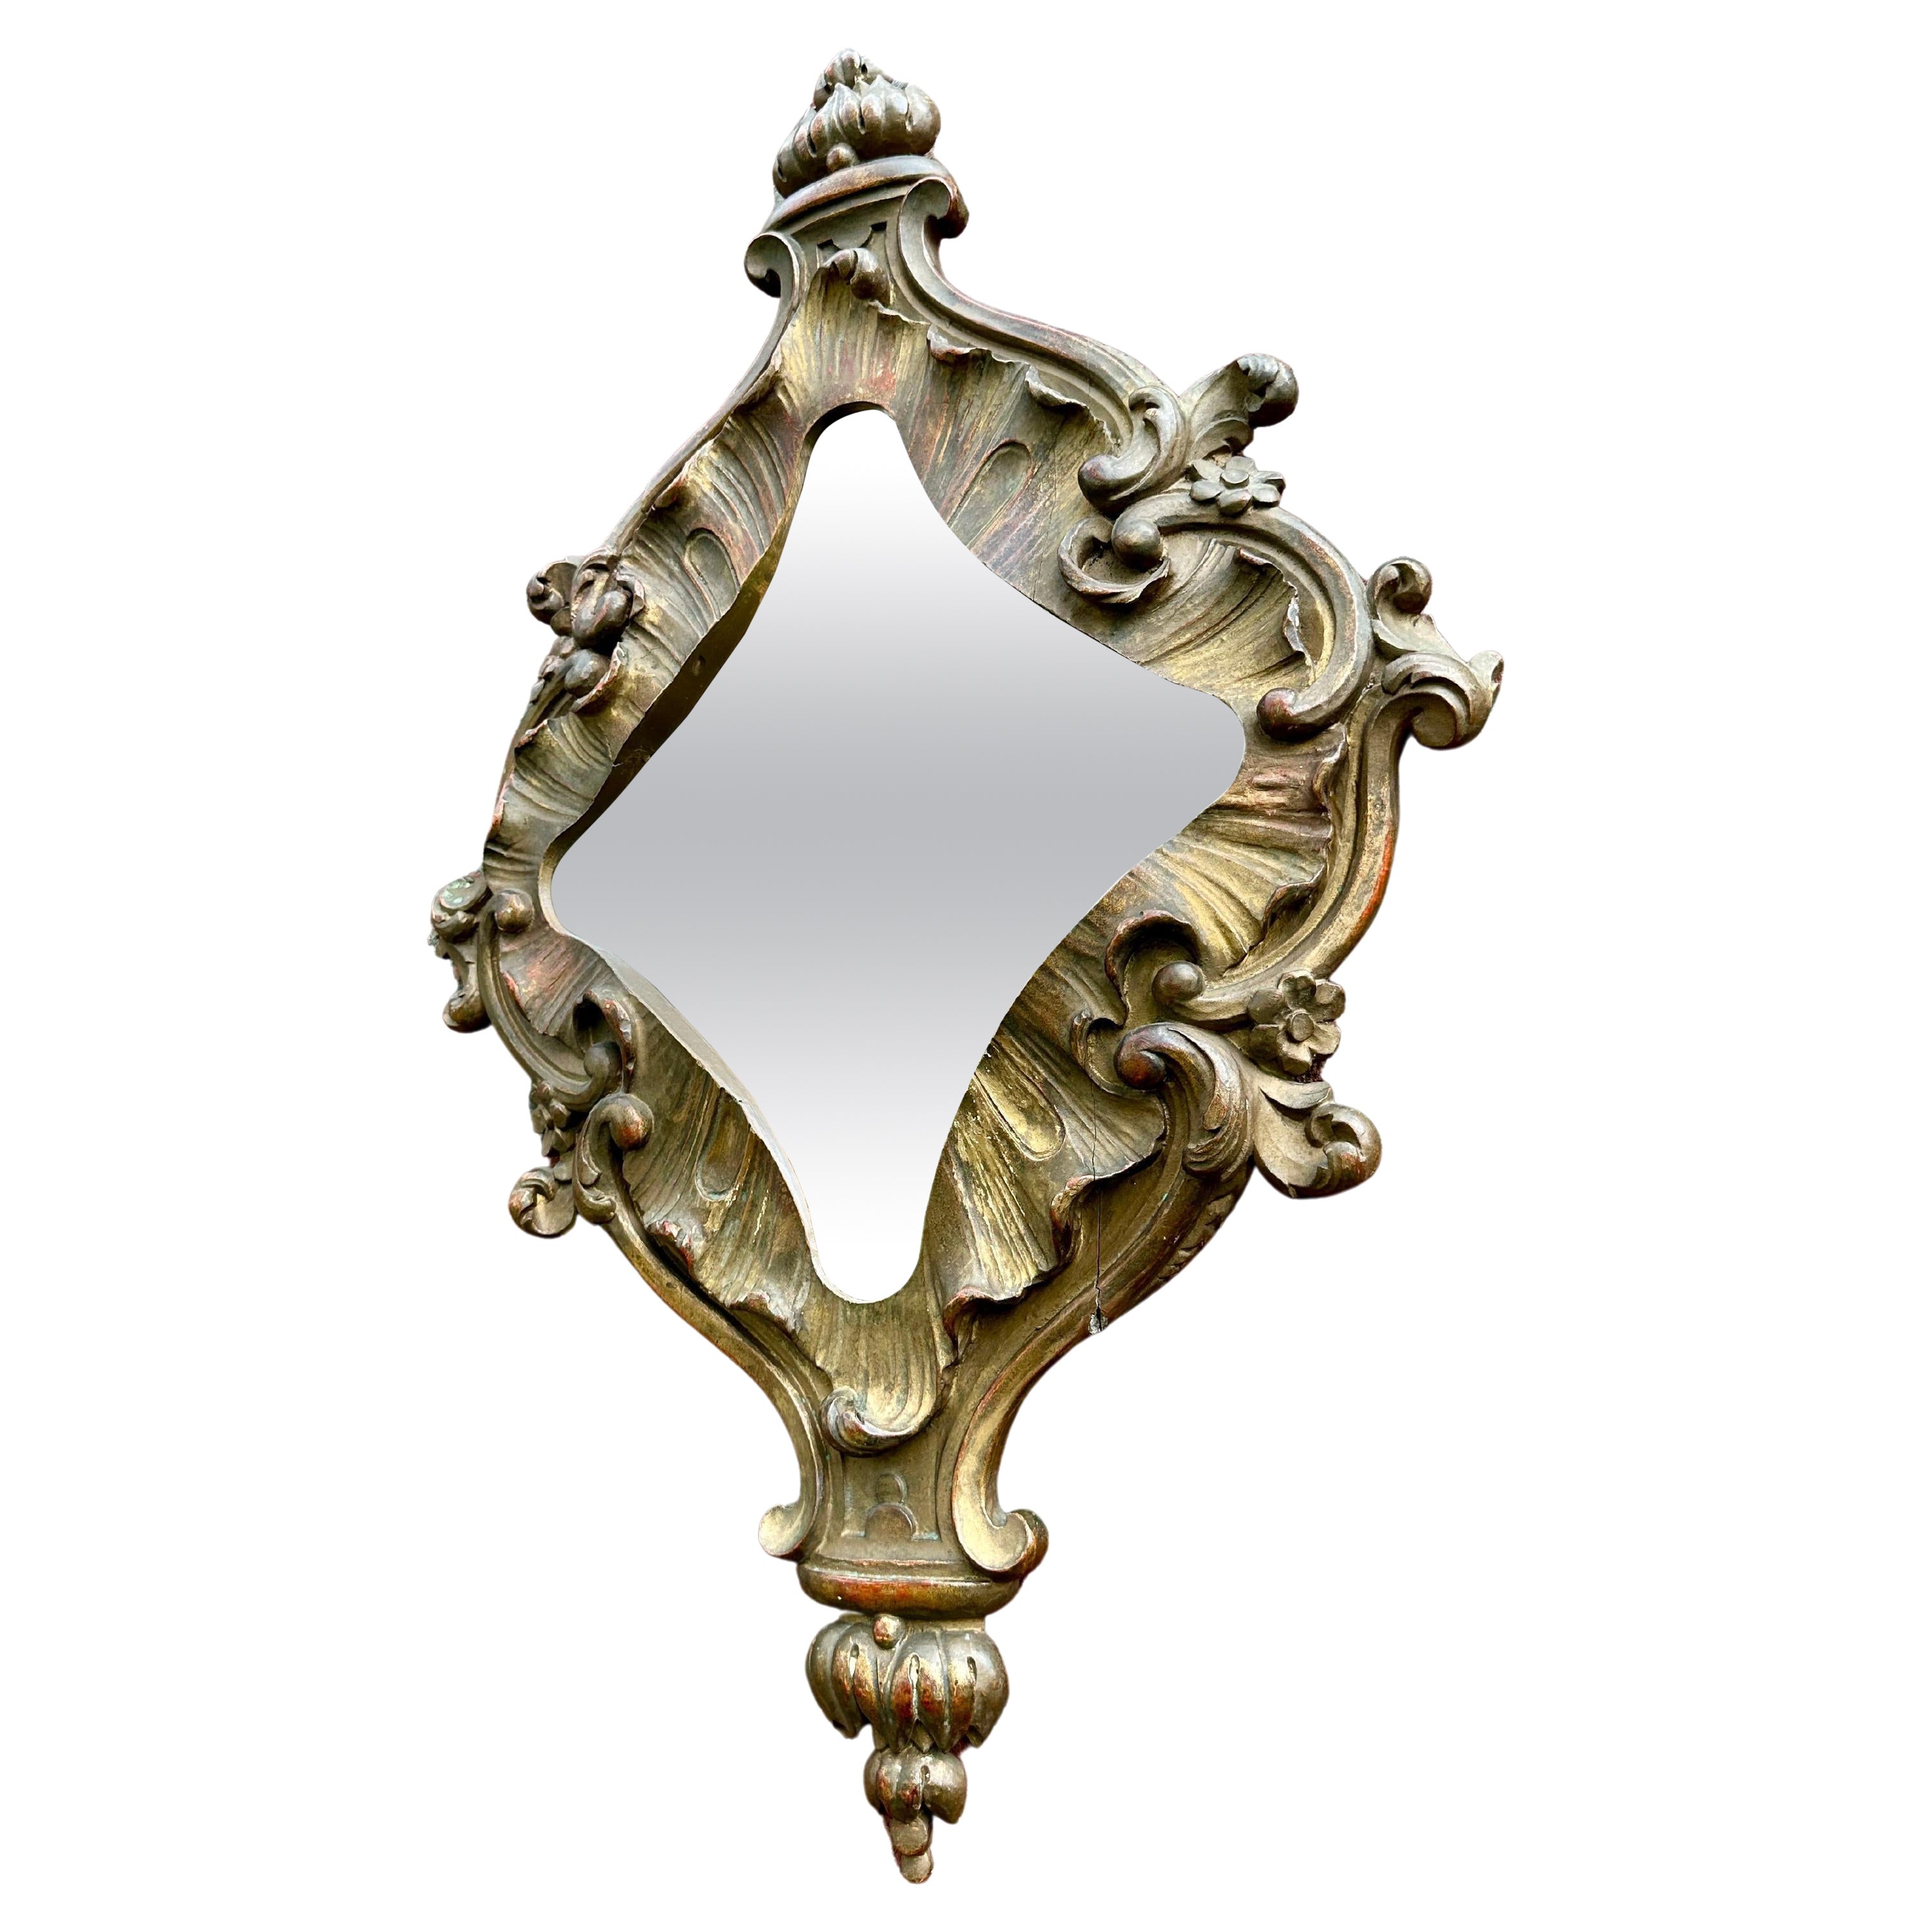 Amazing Design, Deeply Hand Carved & Gilt Antique Baroque Revival Wall Mirror